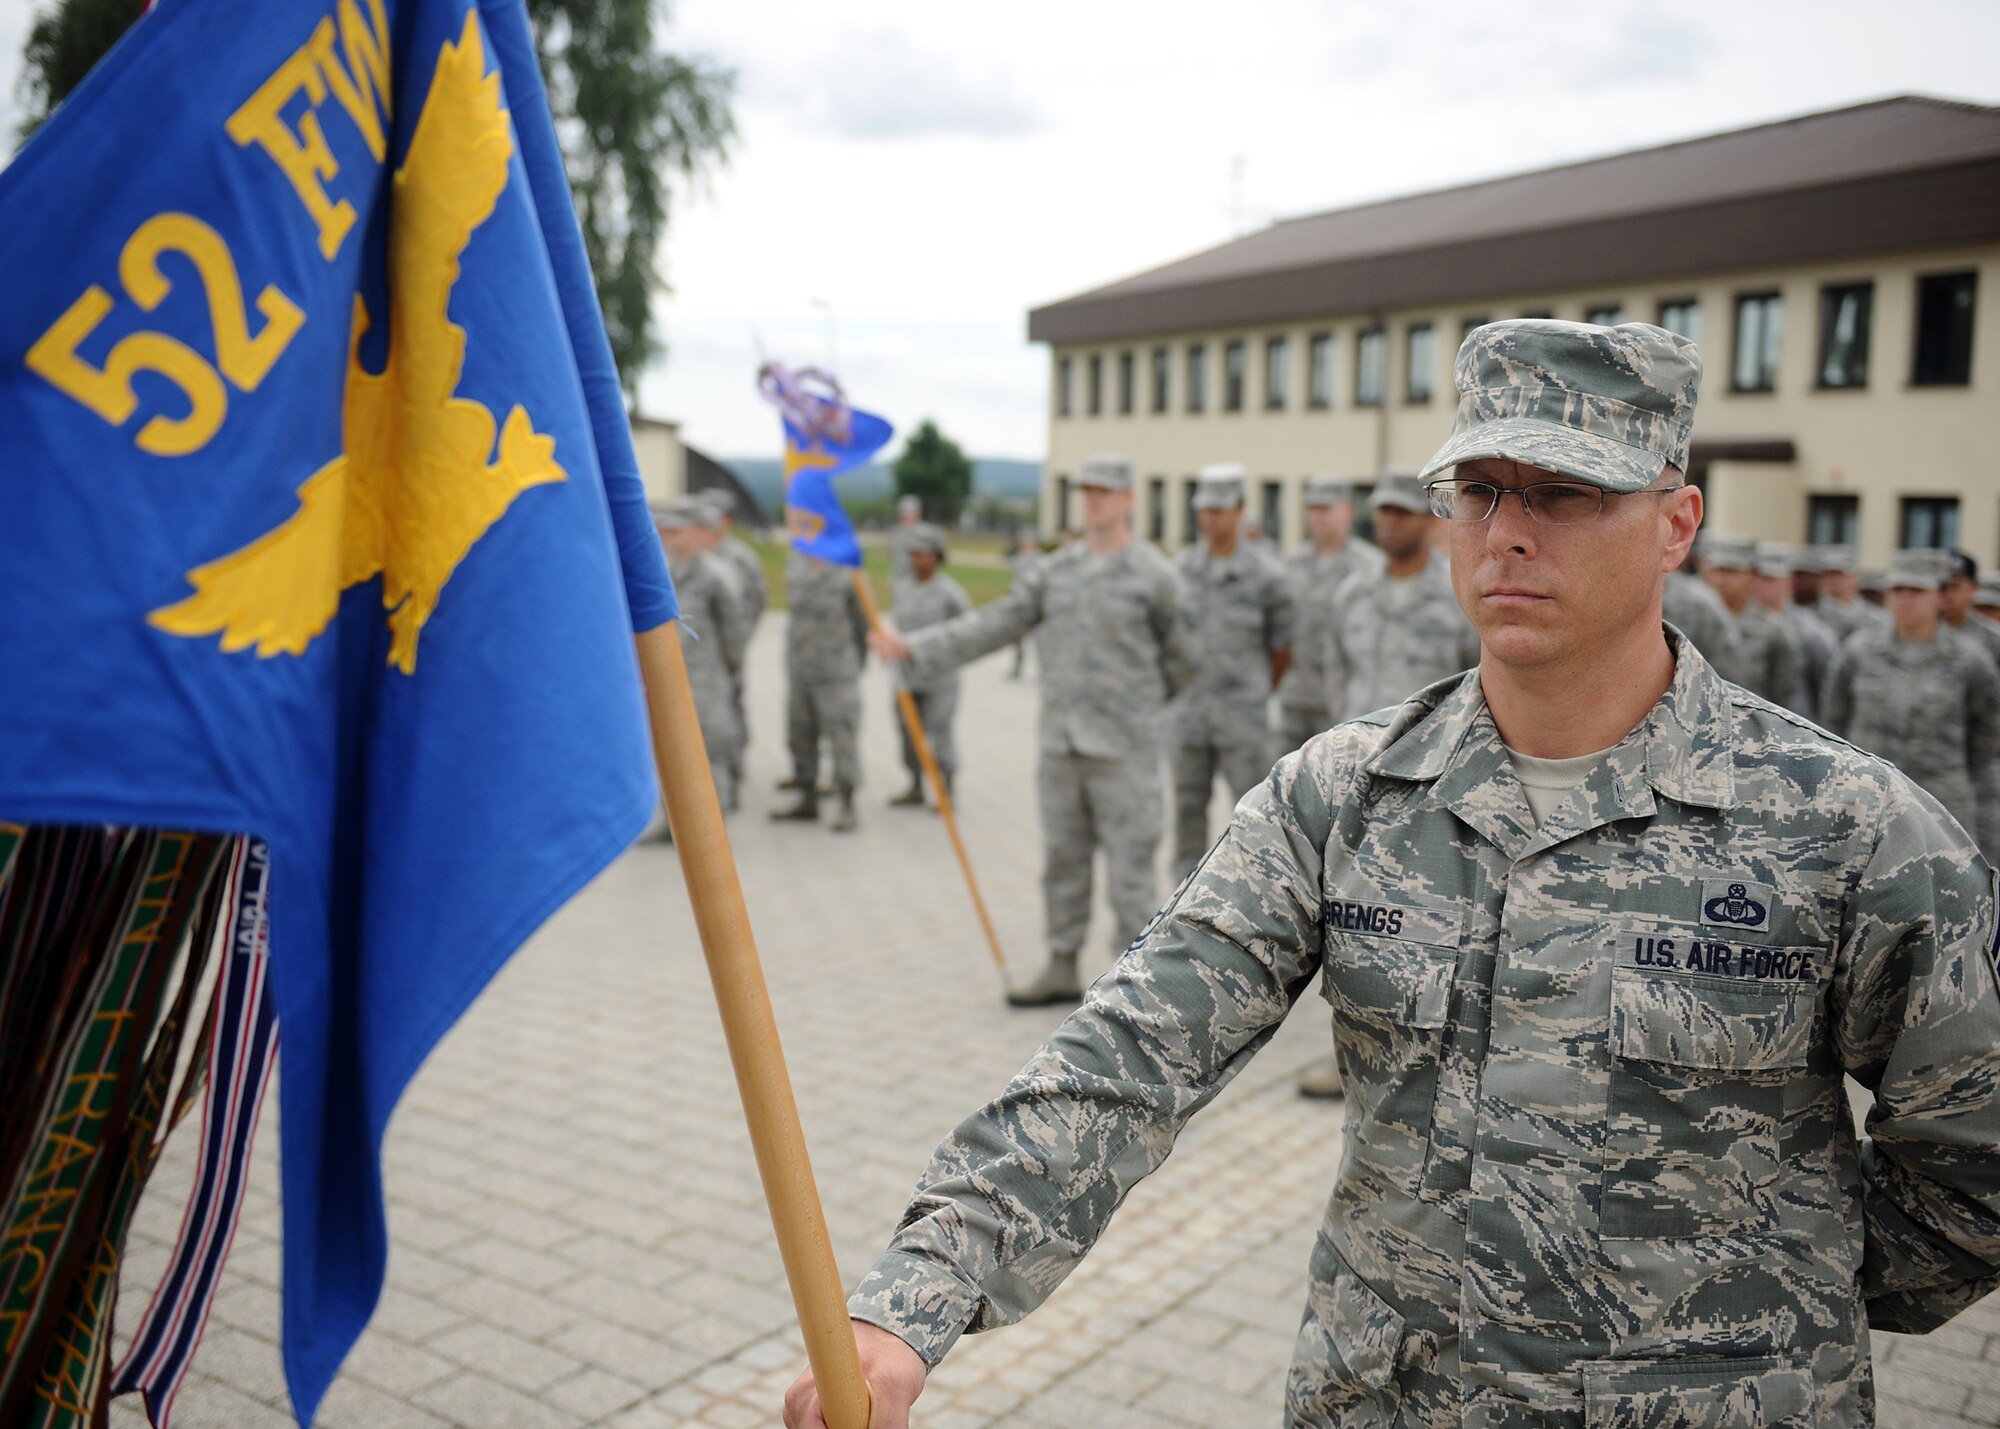 SPANGDAHLEM AIR BASE, Germany – U.S. Air Force Chief Master Sgt. Matthew Grengs, 52nd Fighter Wing command chief master sergeant, holds the wing’s guidon during a new wing retreat ceremony July 29, 2013. Representatives from several base units stood in formation to honor Germany and the United States during the playing of their national anthems. This retreat ceremony is scheduled for once a month during the summer. (U.S. Air Force photo by Staff Sgt. Daryl Knee/Released)